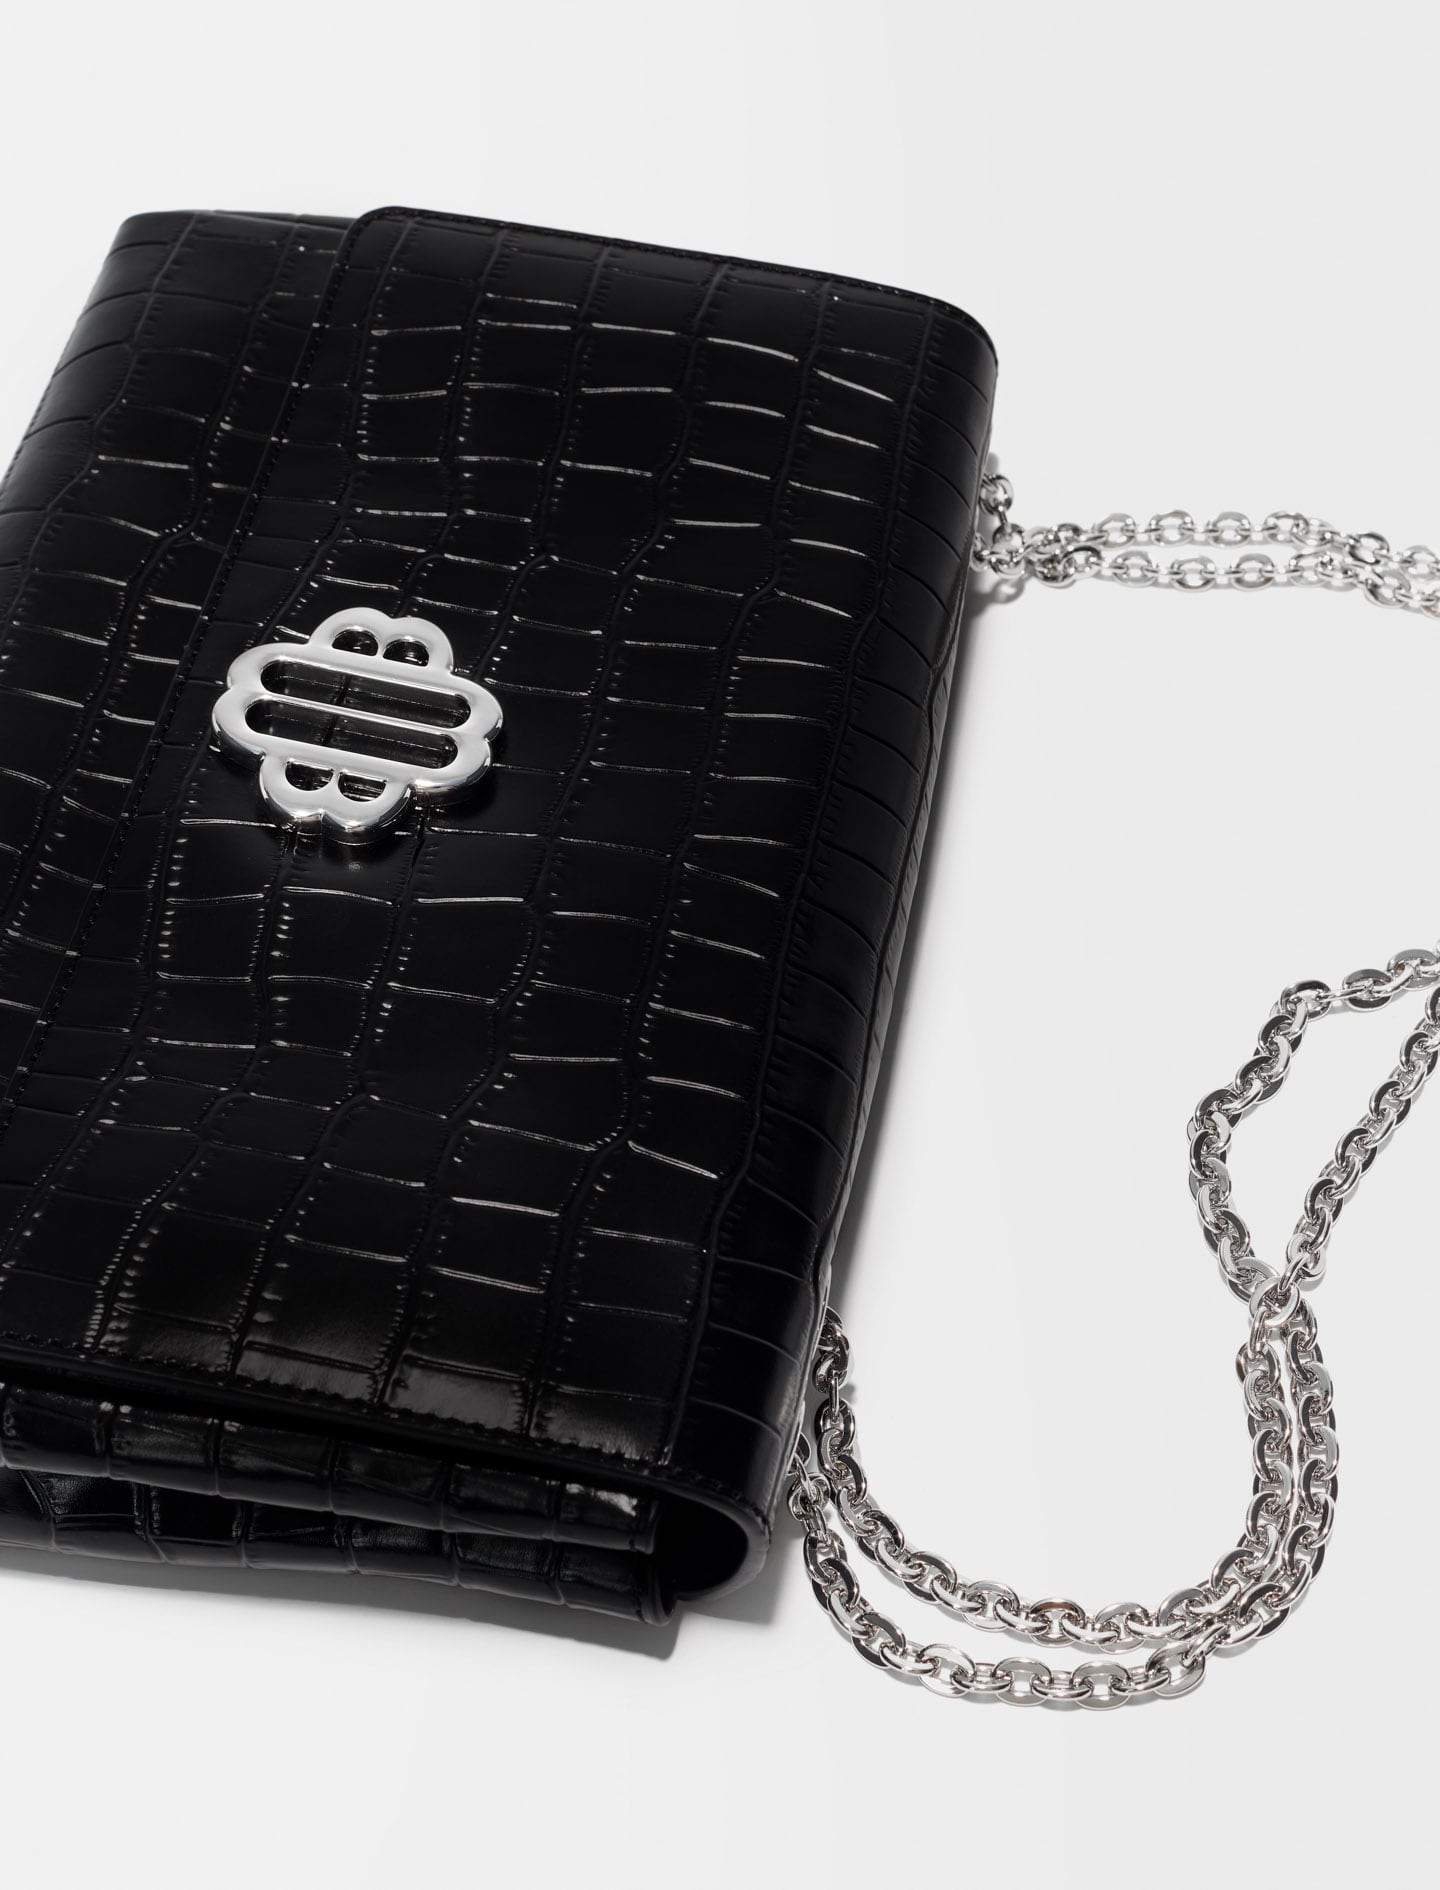 Black EMBOSSED LEATHER BAG WITH CHAIN